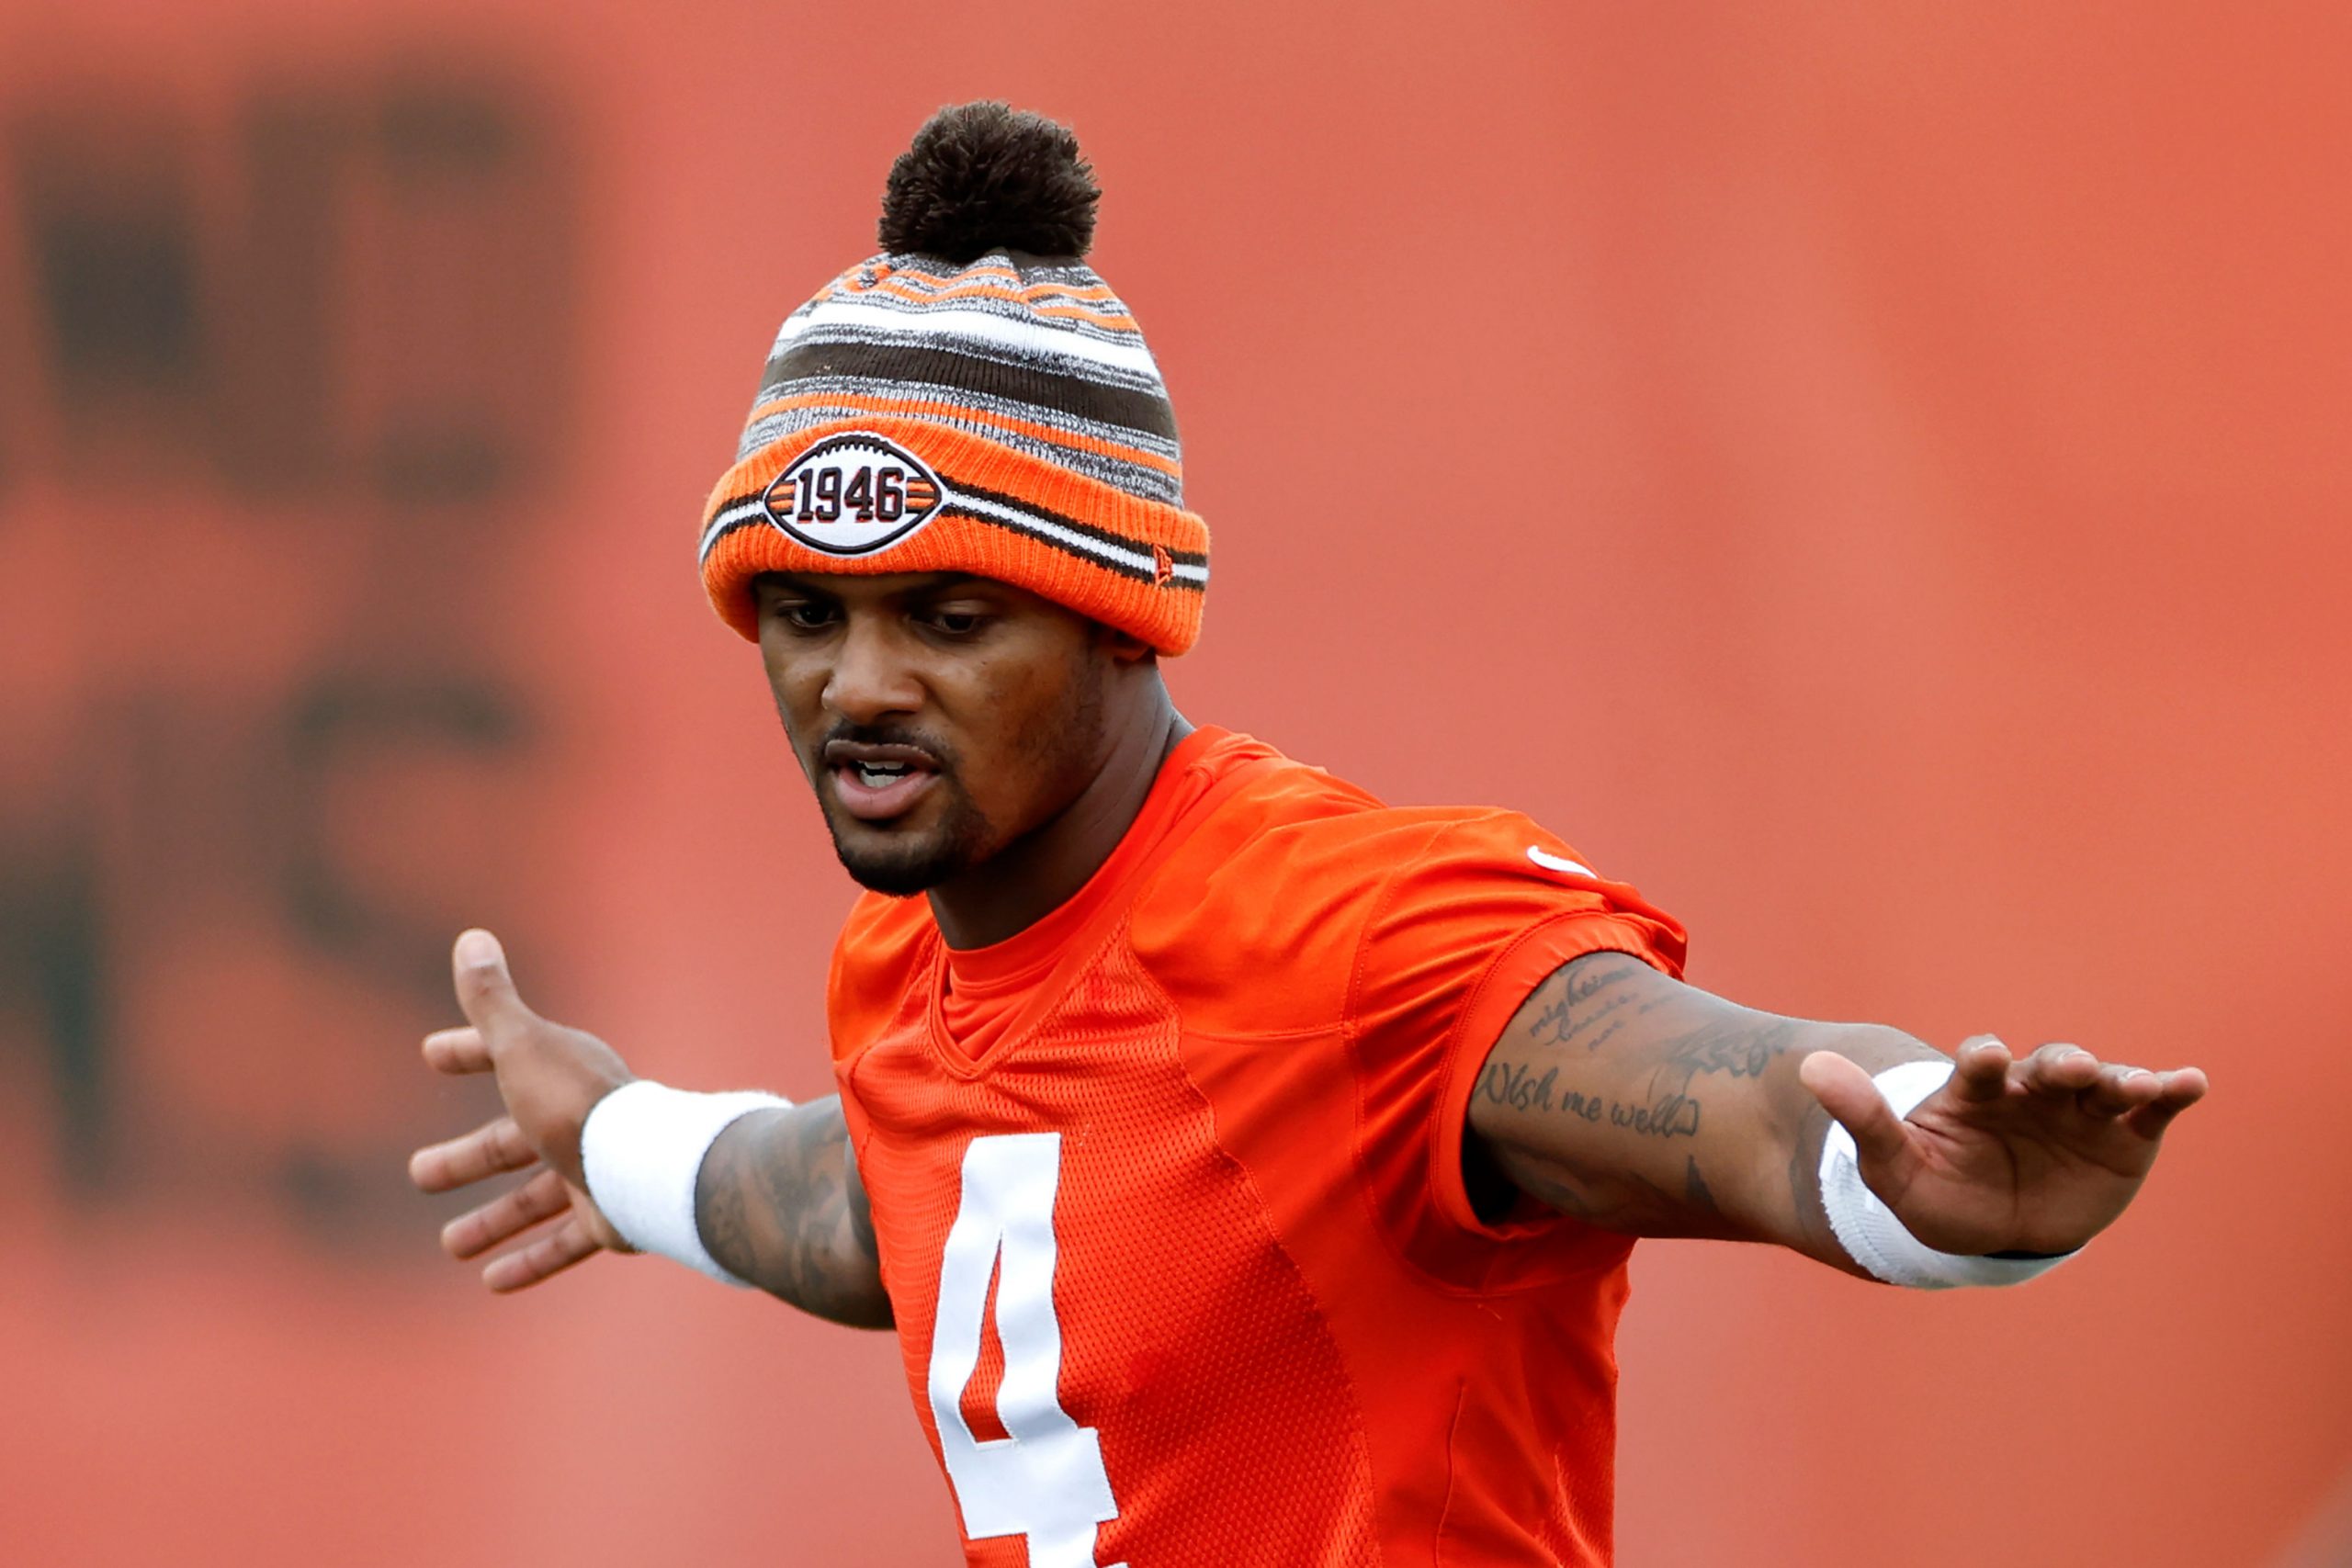 NFL: Deshaun Watson of Cleveland Browns reiterates innocence in sexual misconduct case